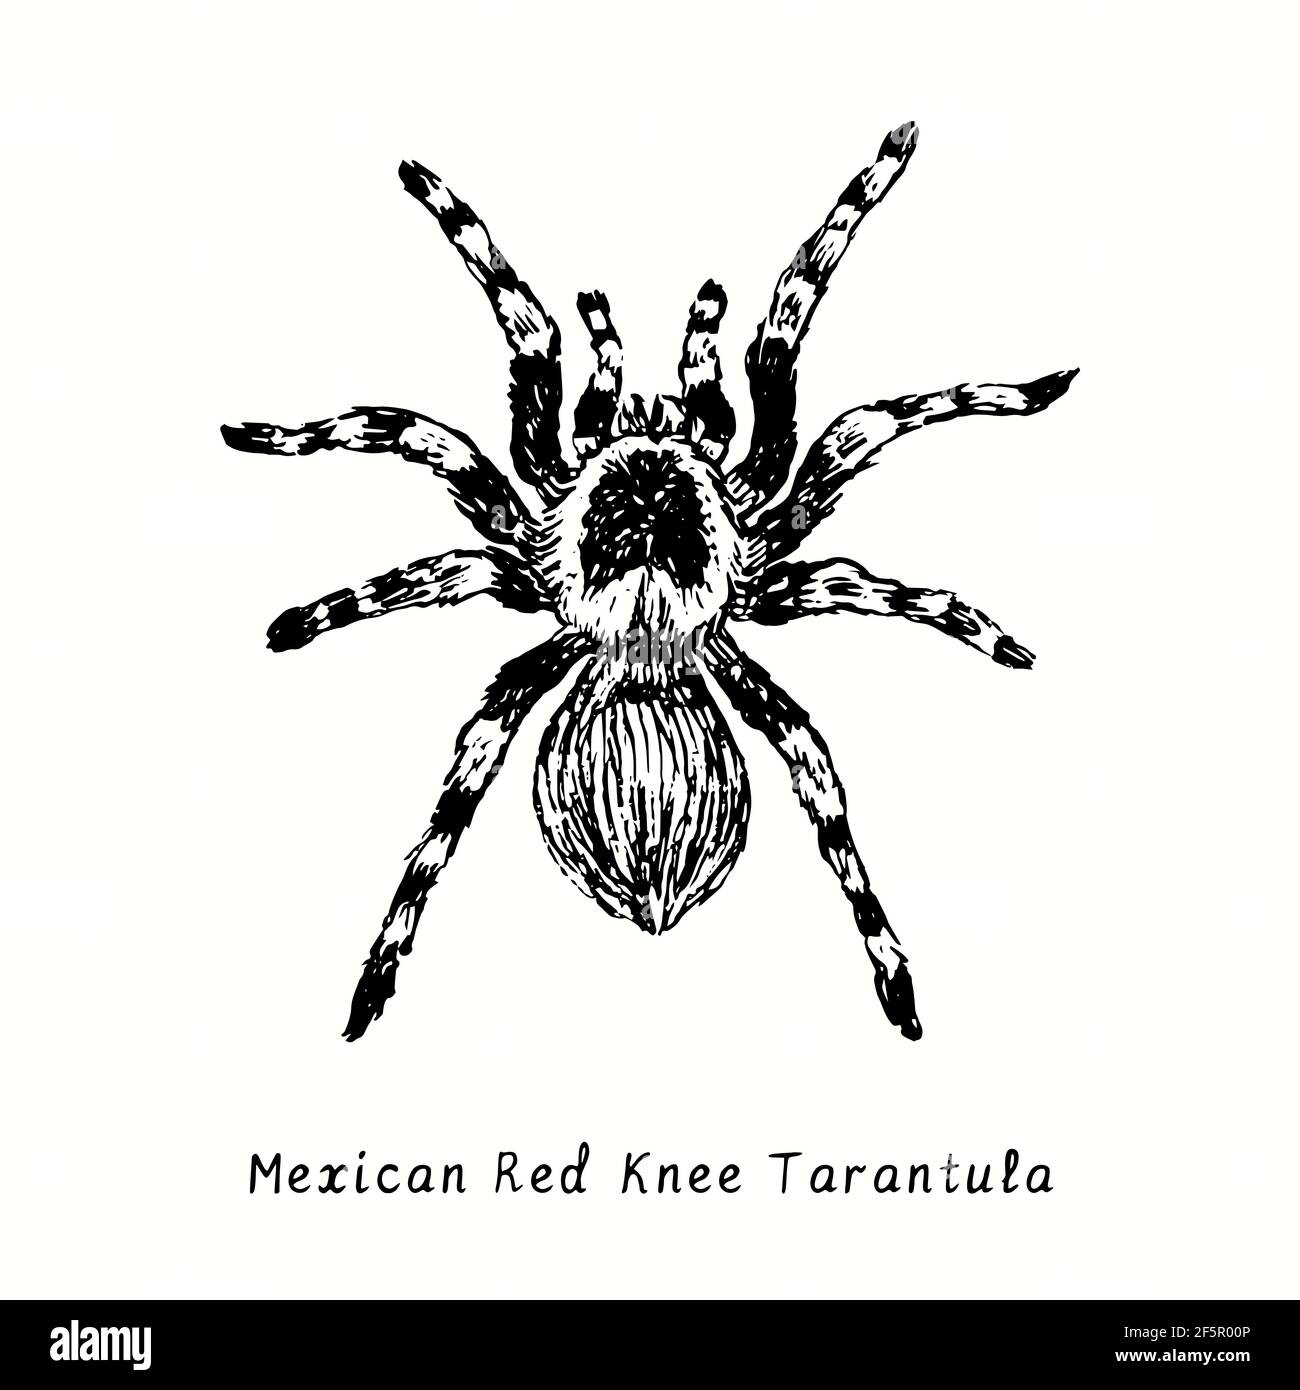 Mexican redknee tarantula (Brachypelma hamorii). Ink black and white doodle drawing in woodcut style. Stock Photo